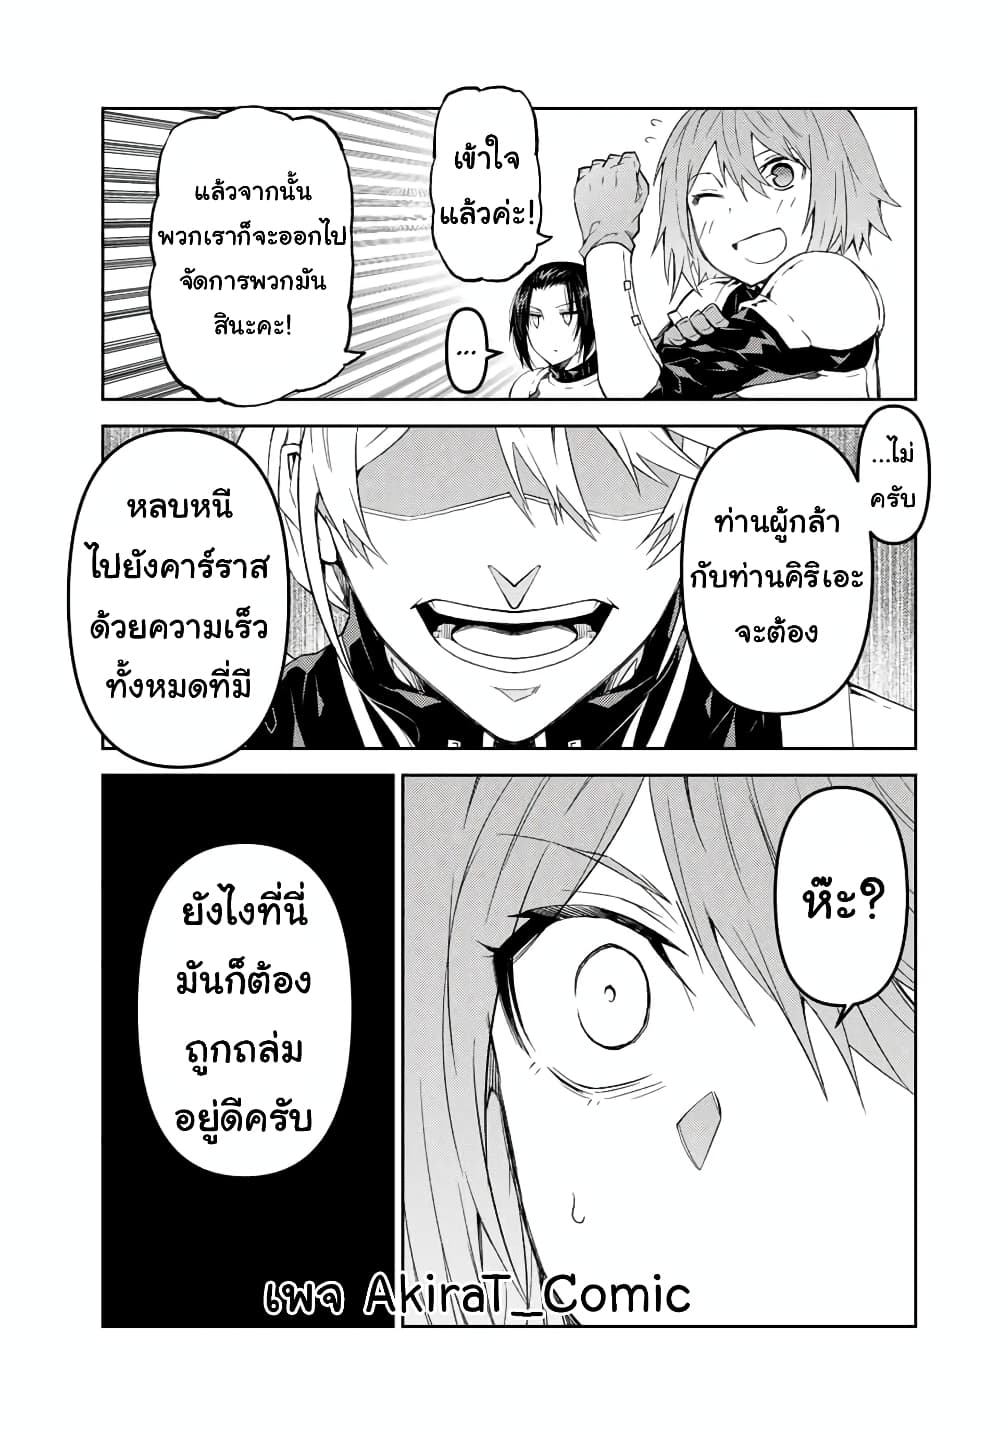 The Weakest Occupation "Blacksmith", but It's Actually the Strongest ช่างตีเหล็กอาชีพกระจอก? 49-49